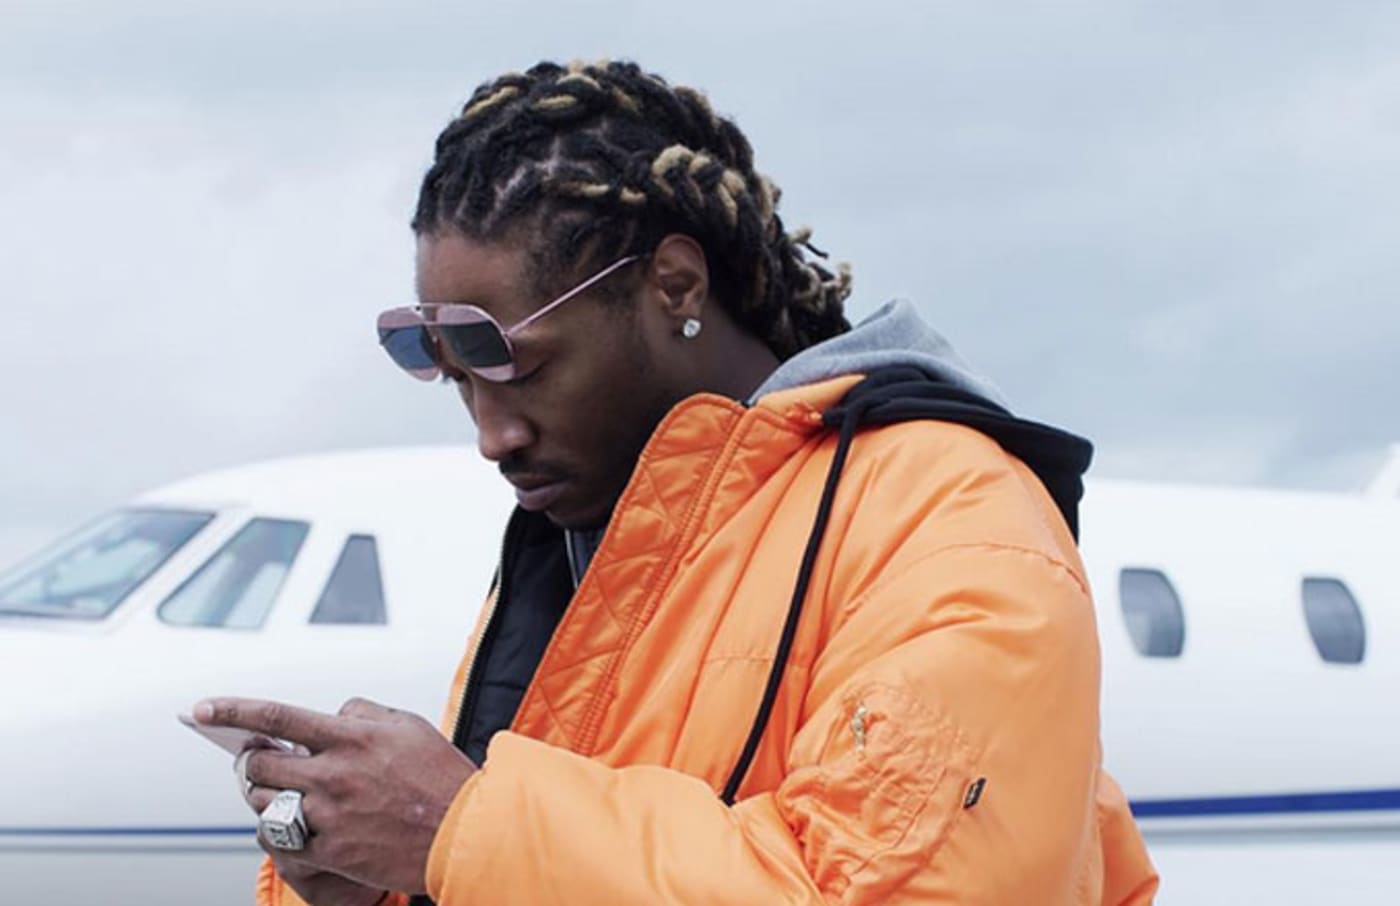 Future poses for an Instagram picture.